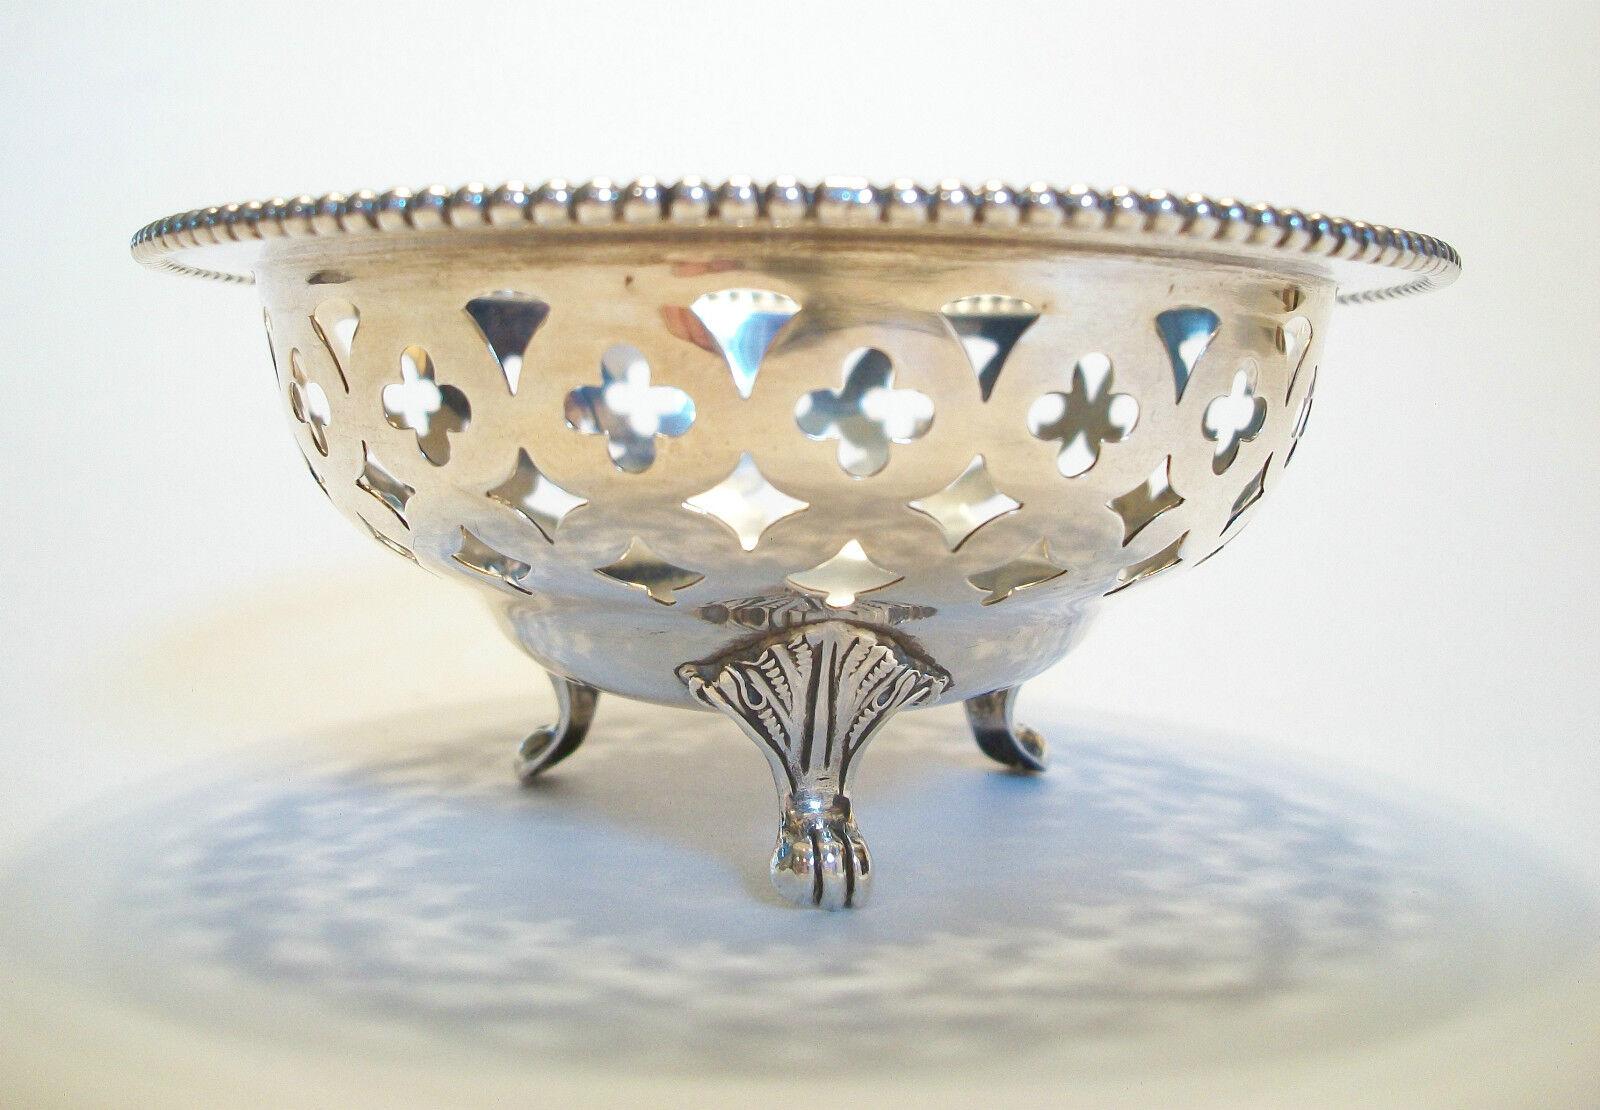 Canadian RYRIE BROS. - Pierced Sterling Silver Bonbon Dish - Canada - Early 20th Century For Sale